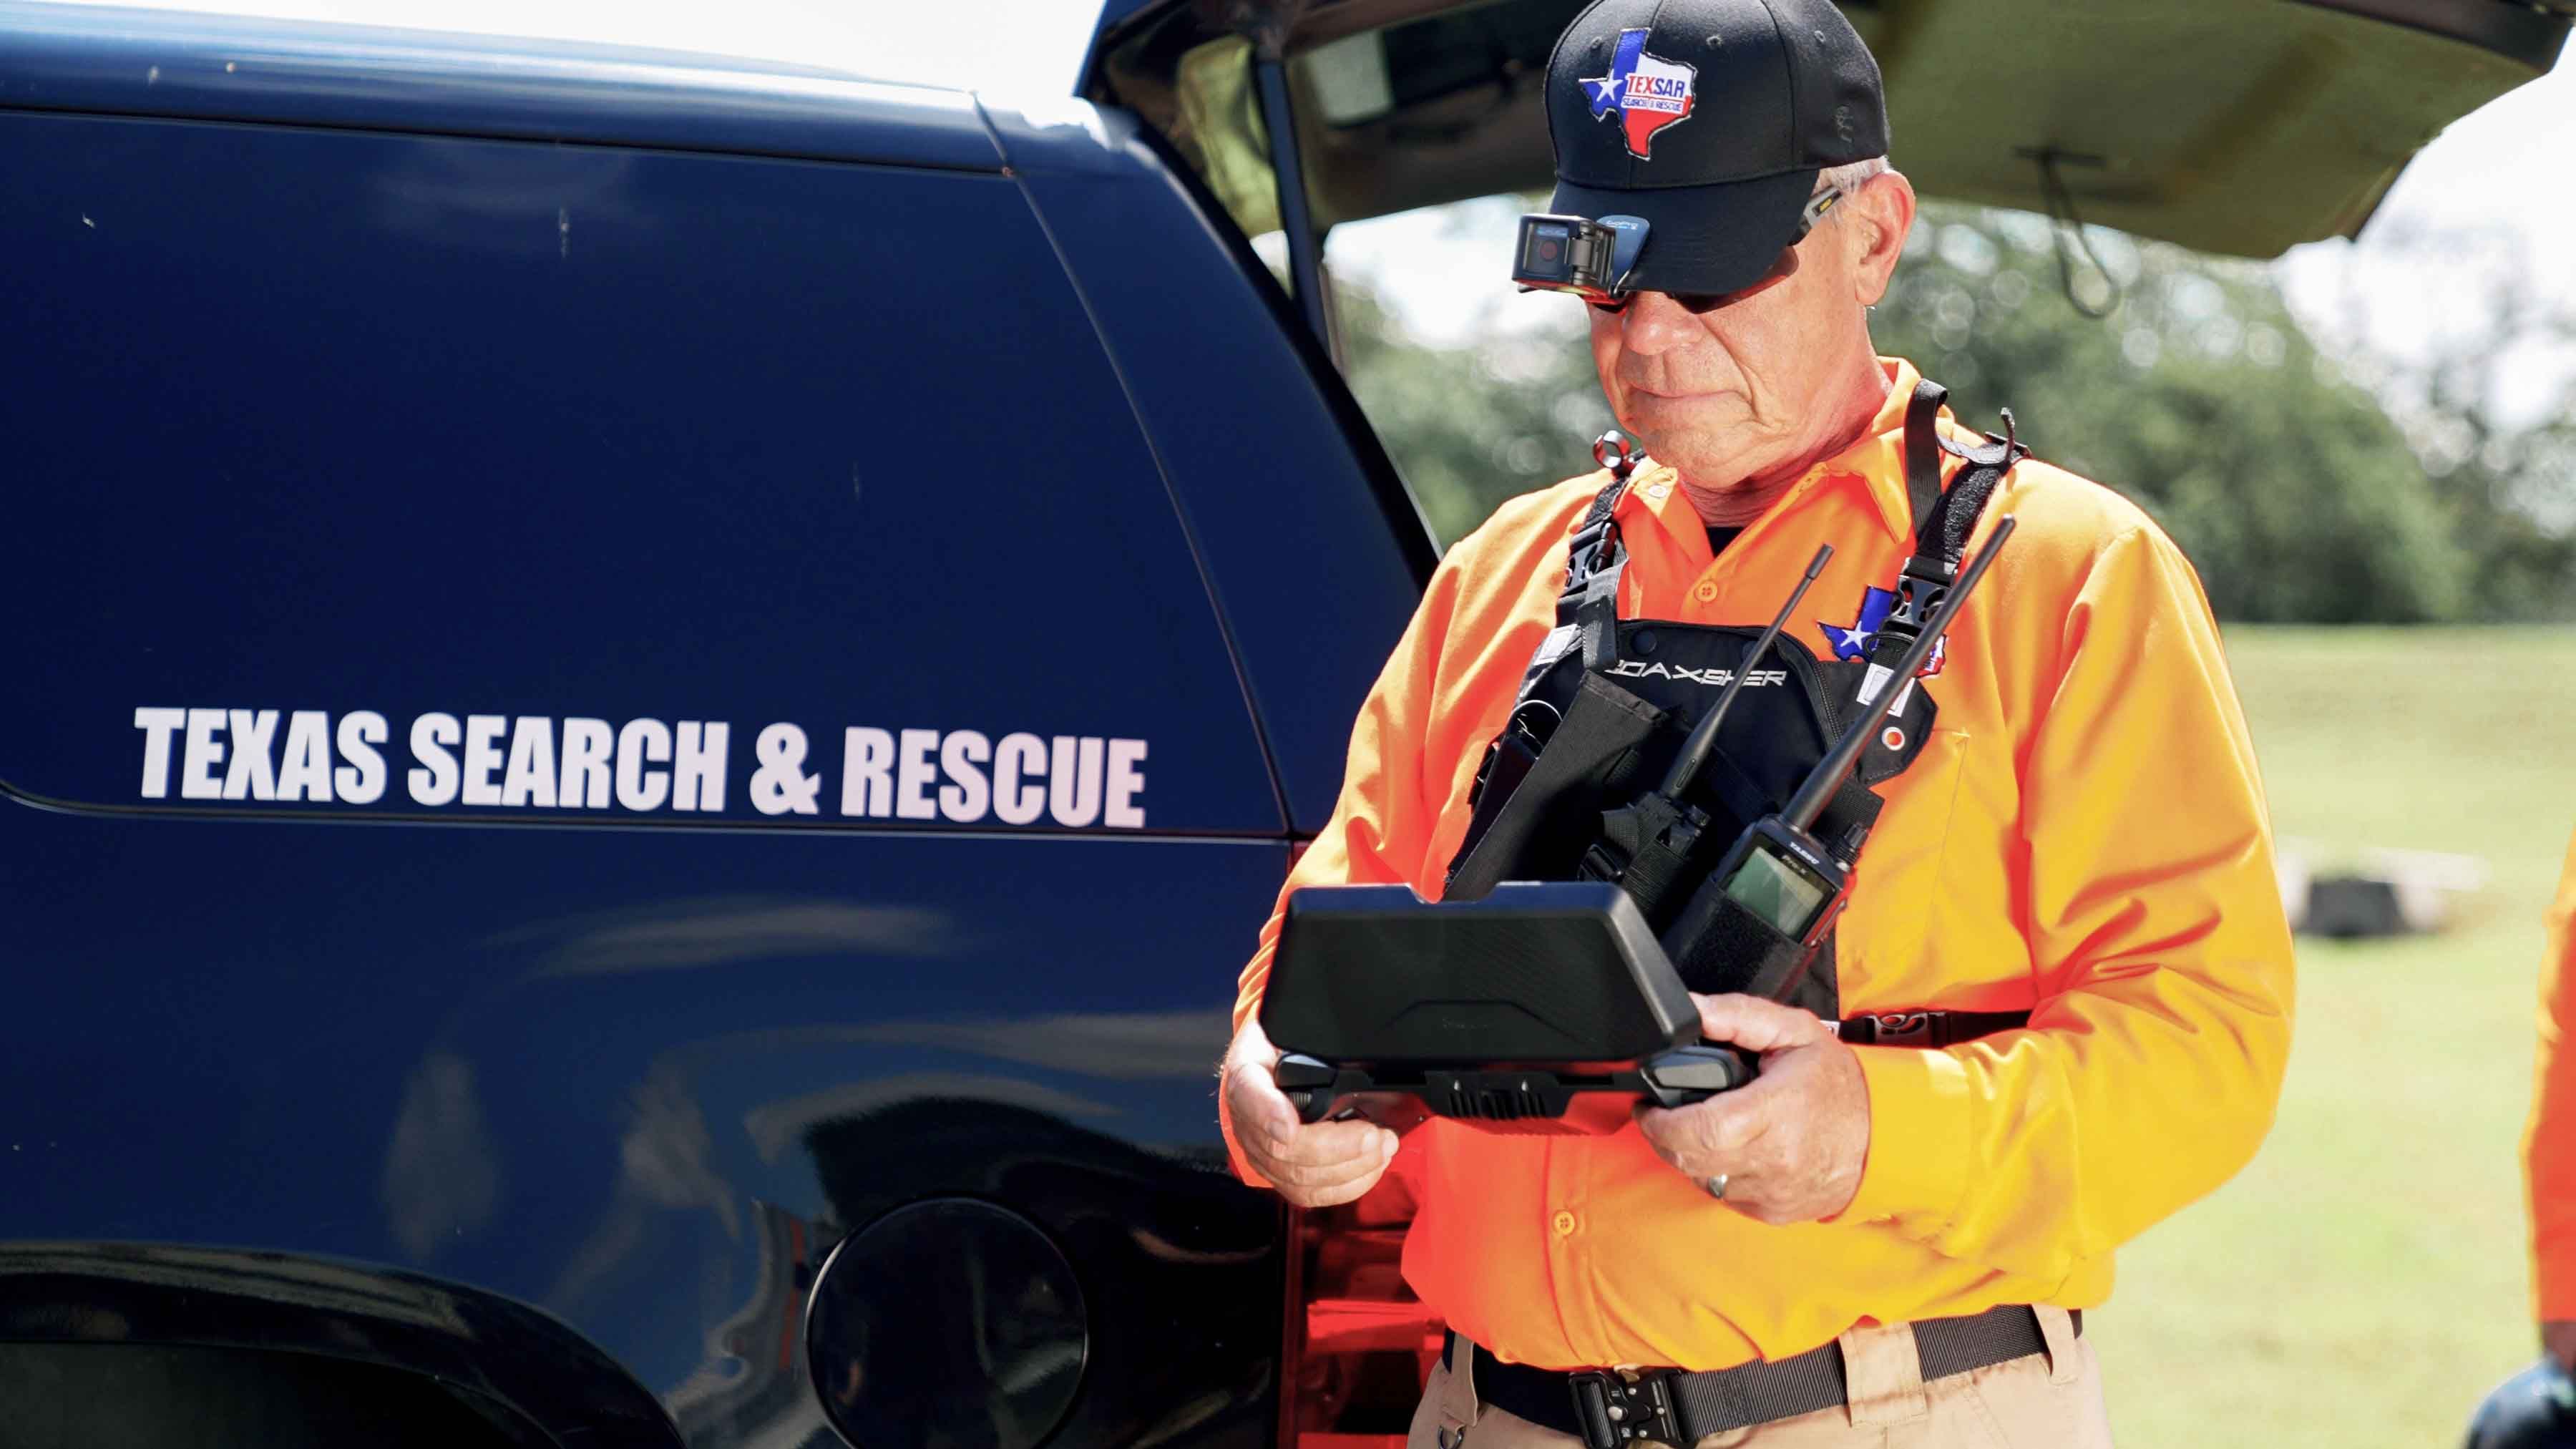 Search and Rescue member using a Skydio drone controller